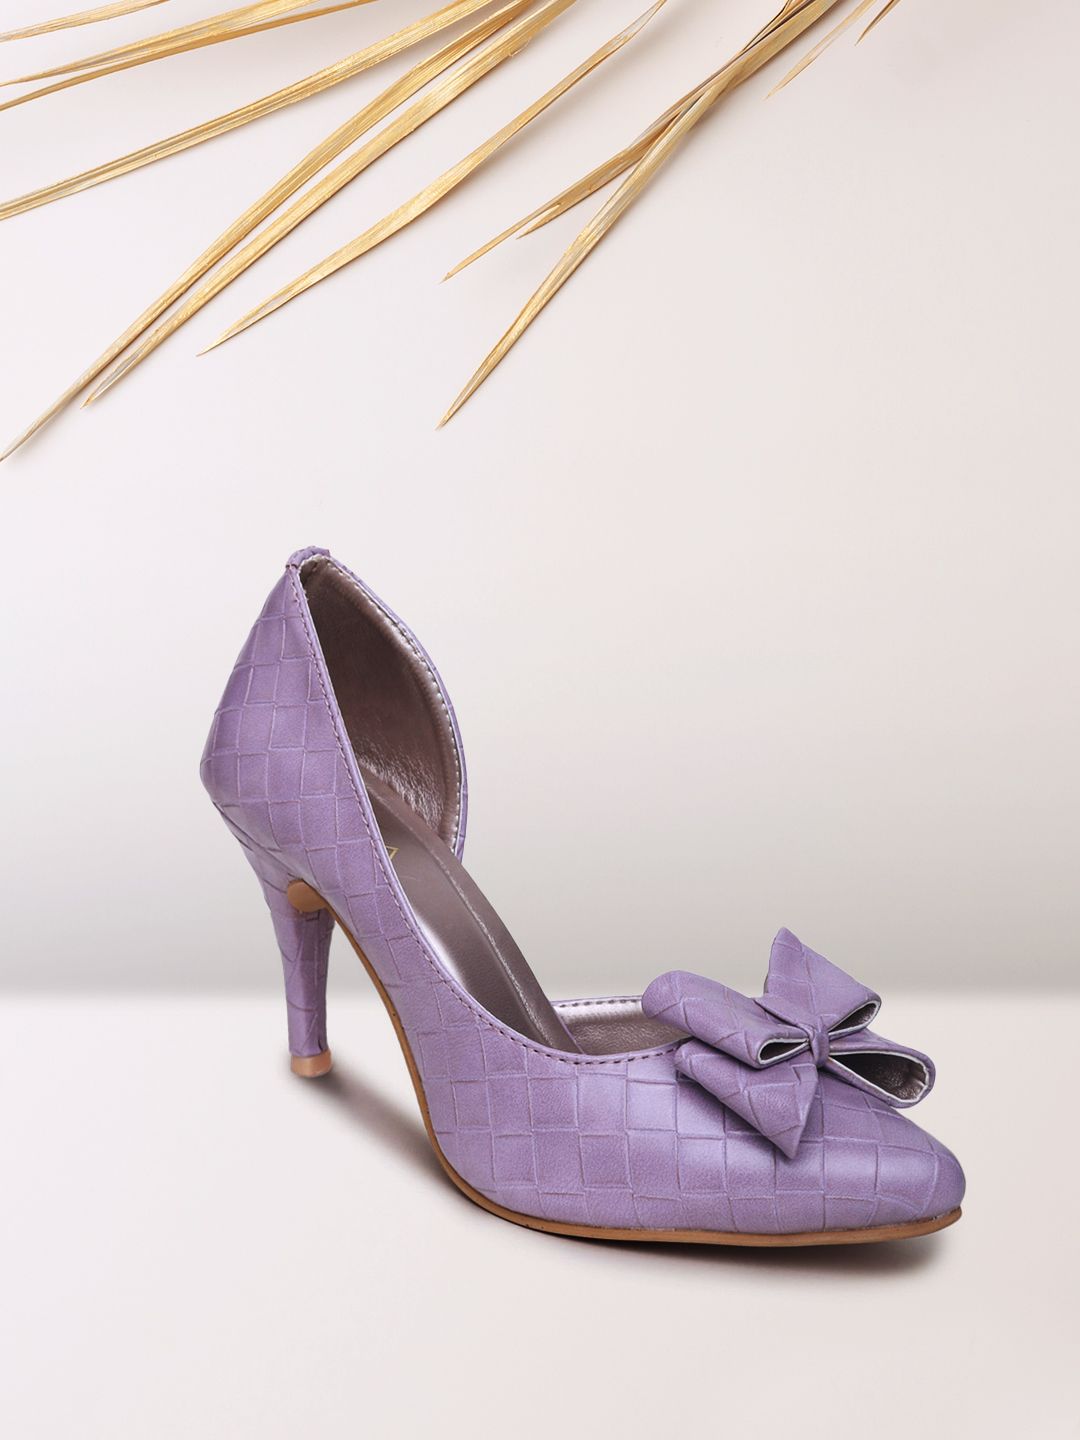 VALIOSAA Purple Textured Pumps with Bows Price in India